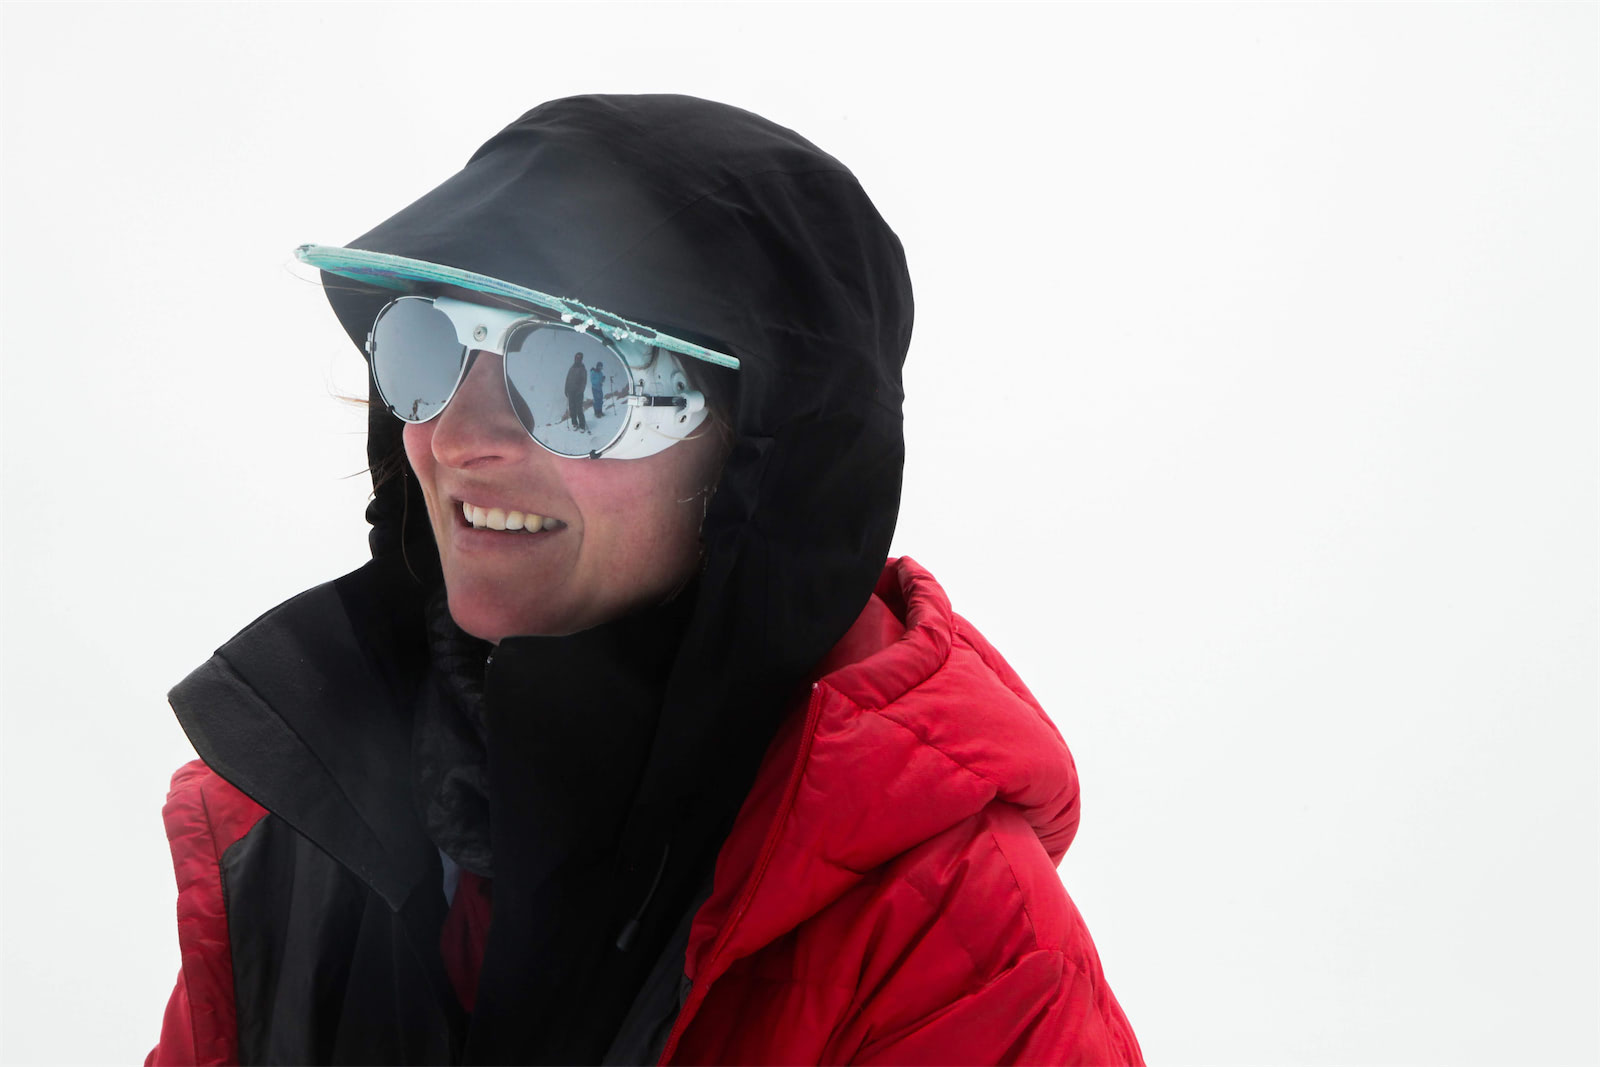 Glacier glasses aren't required, but they sure are nice to keep the sun (if it shows up) out of your eyes. 